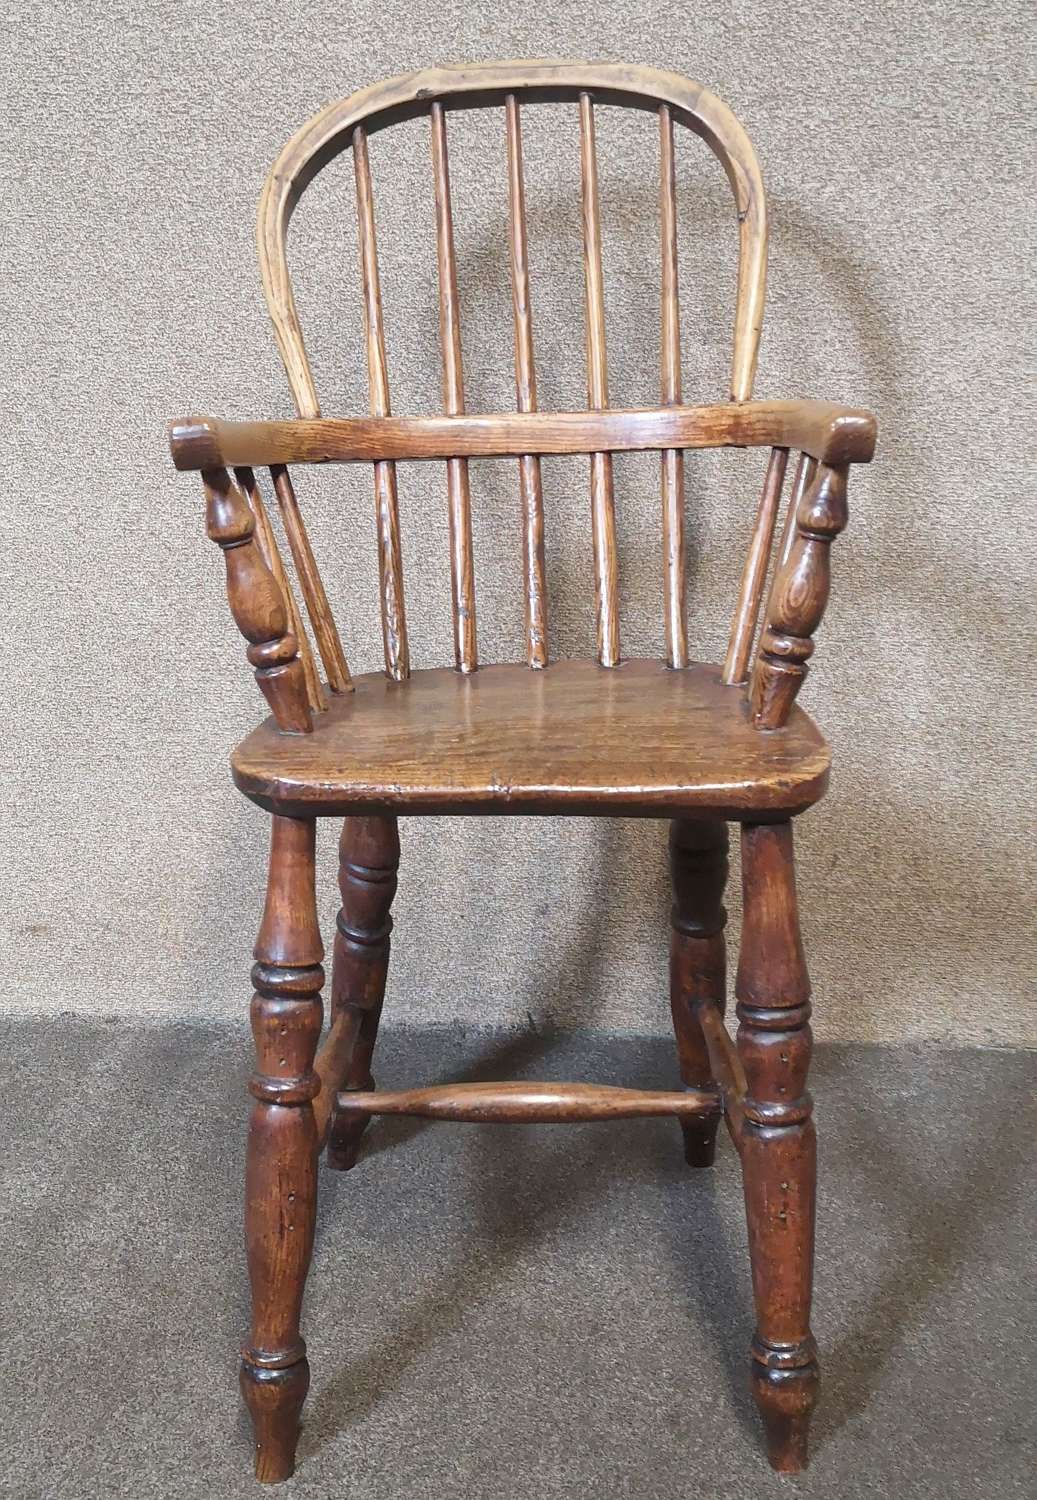 Antique Childs Windsor High Chair